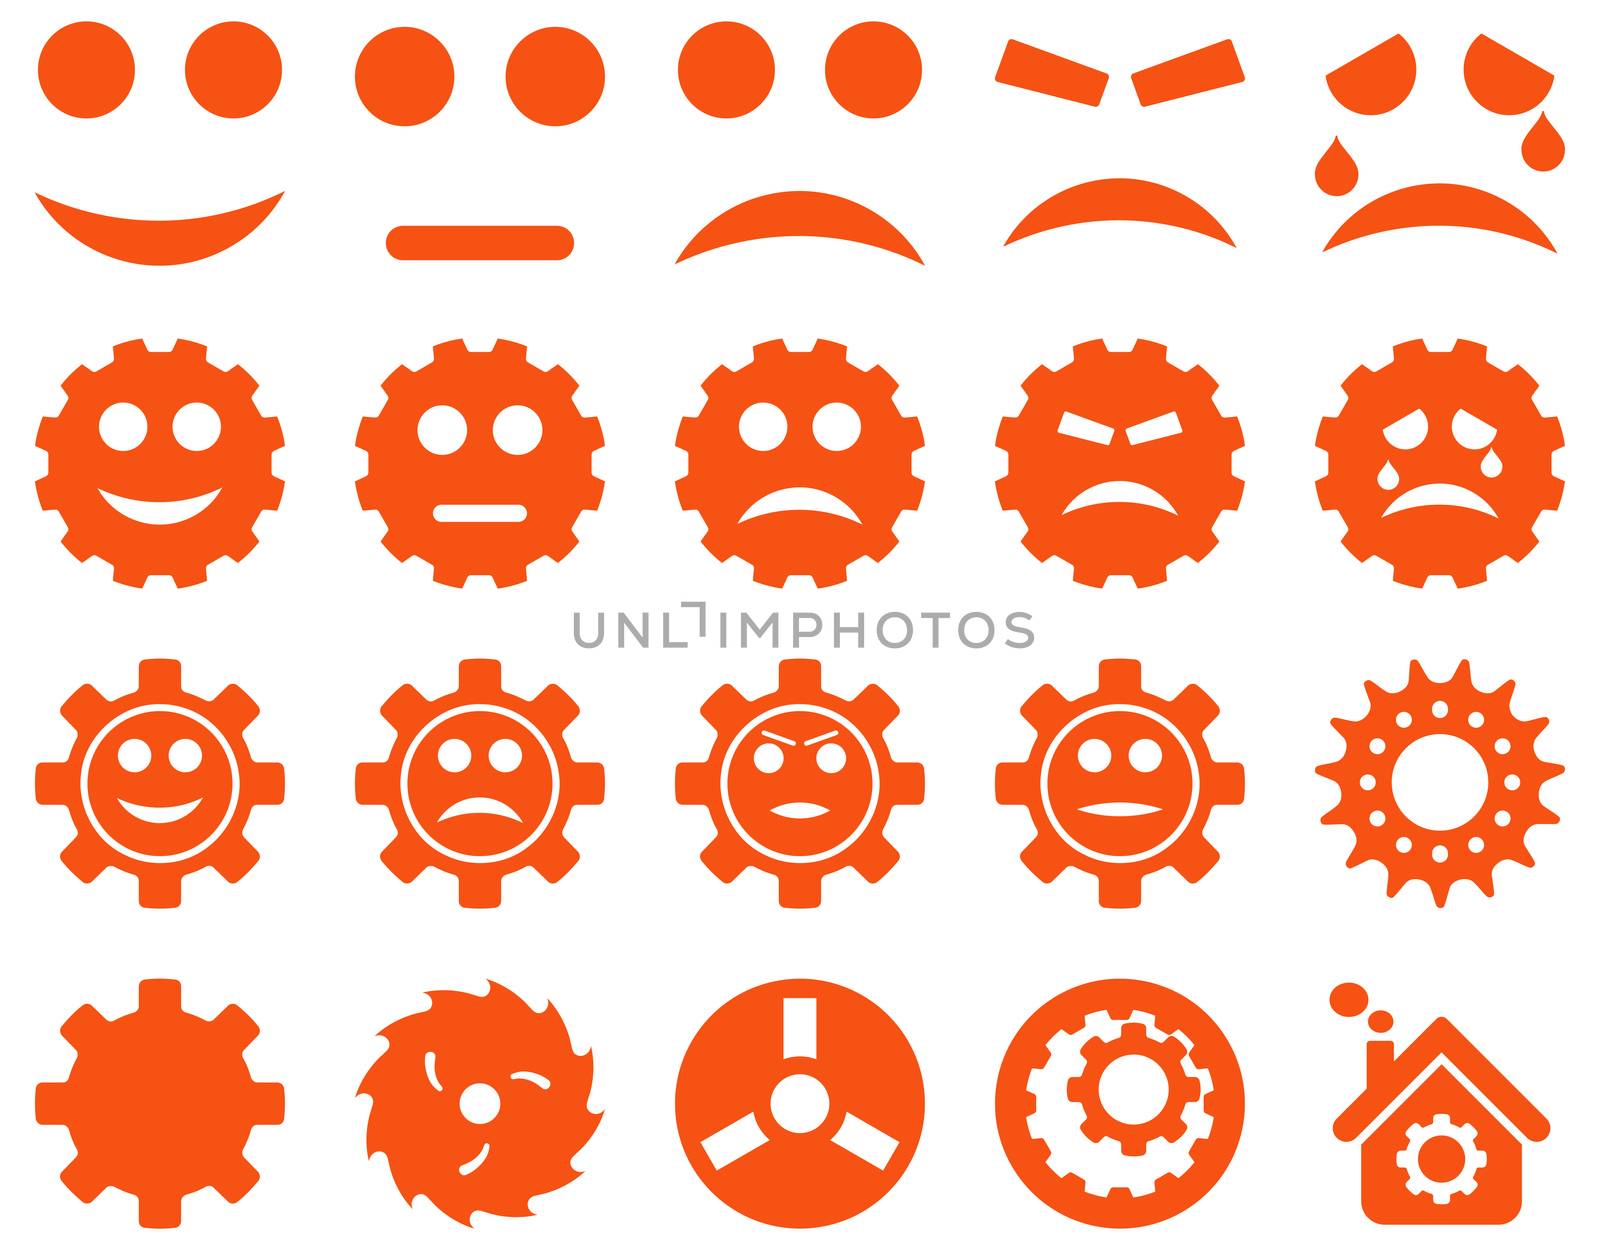 Tools and Smile Gears Icons. Glyph set style is flat images, orange color, isolated on a white background.